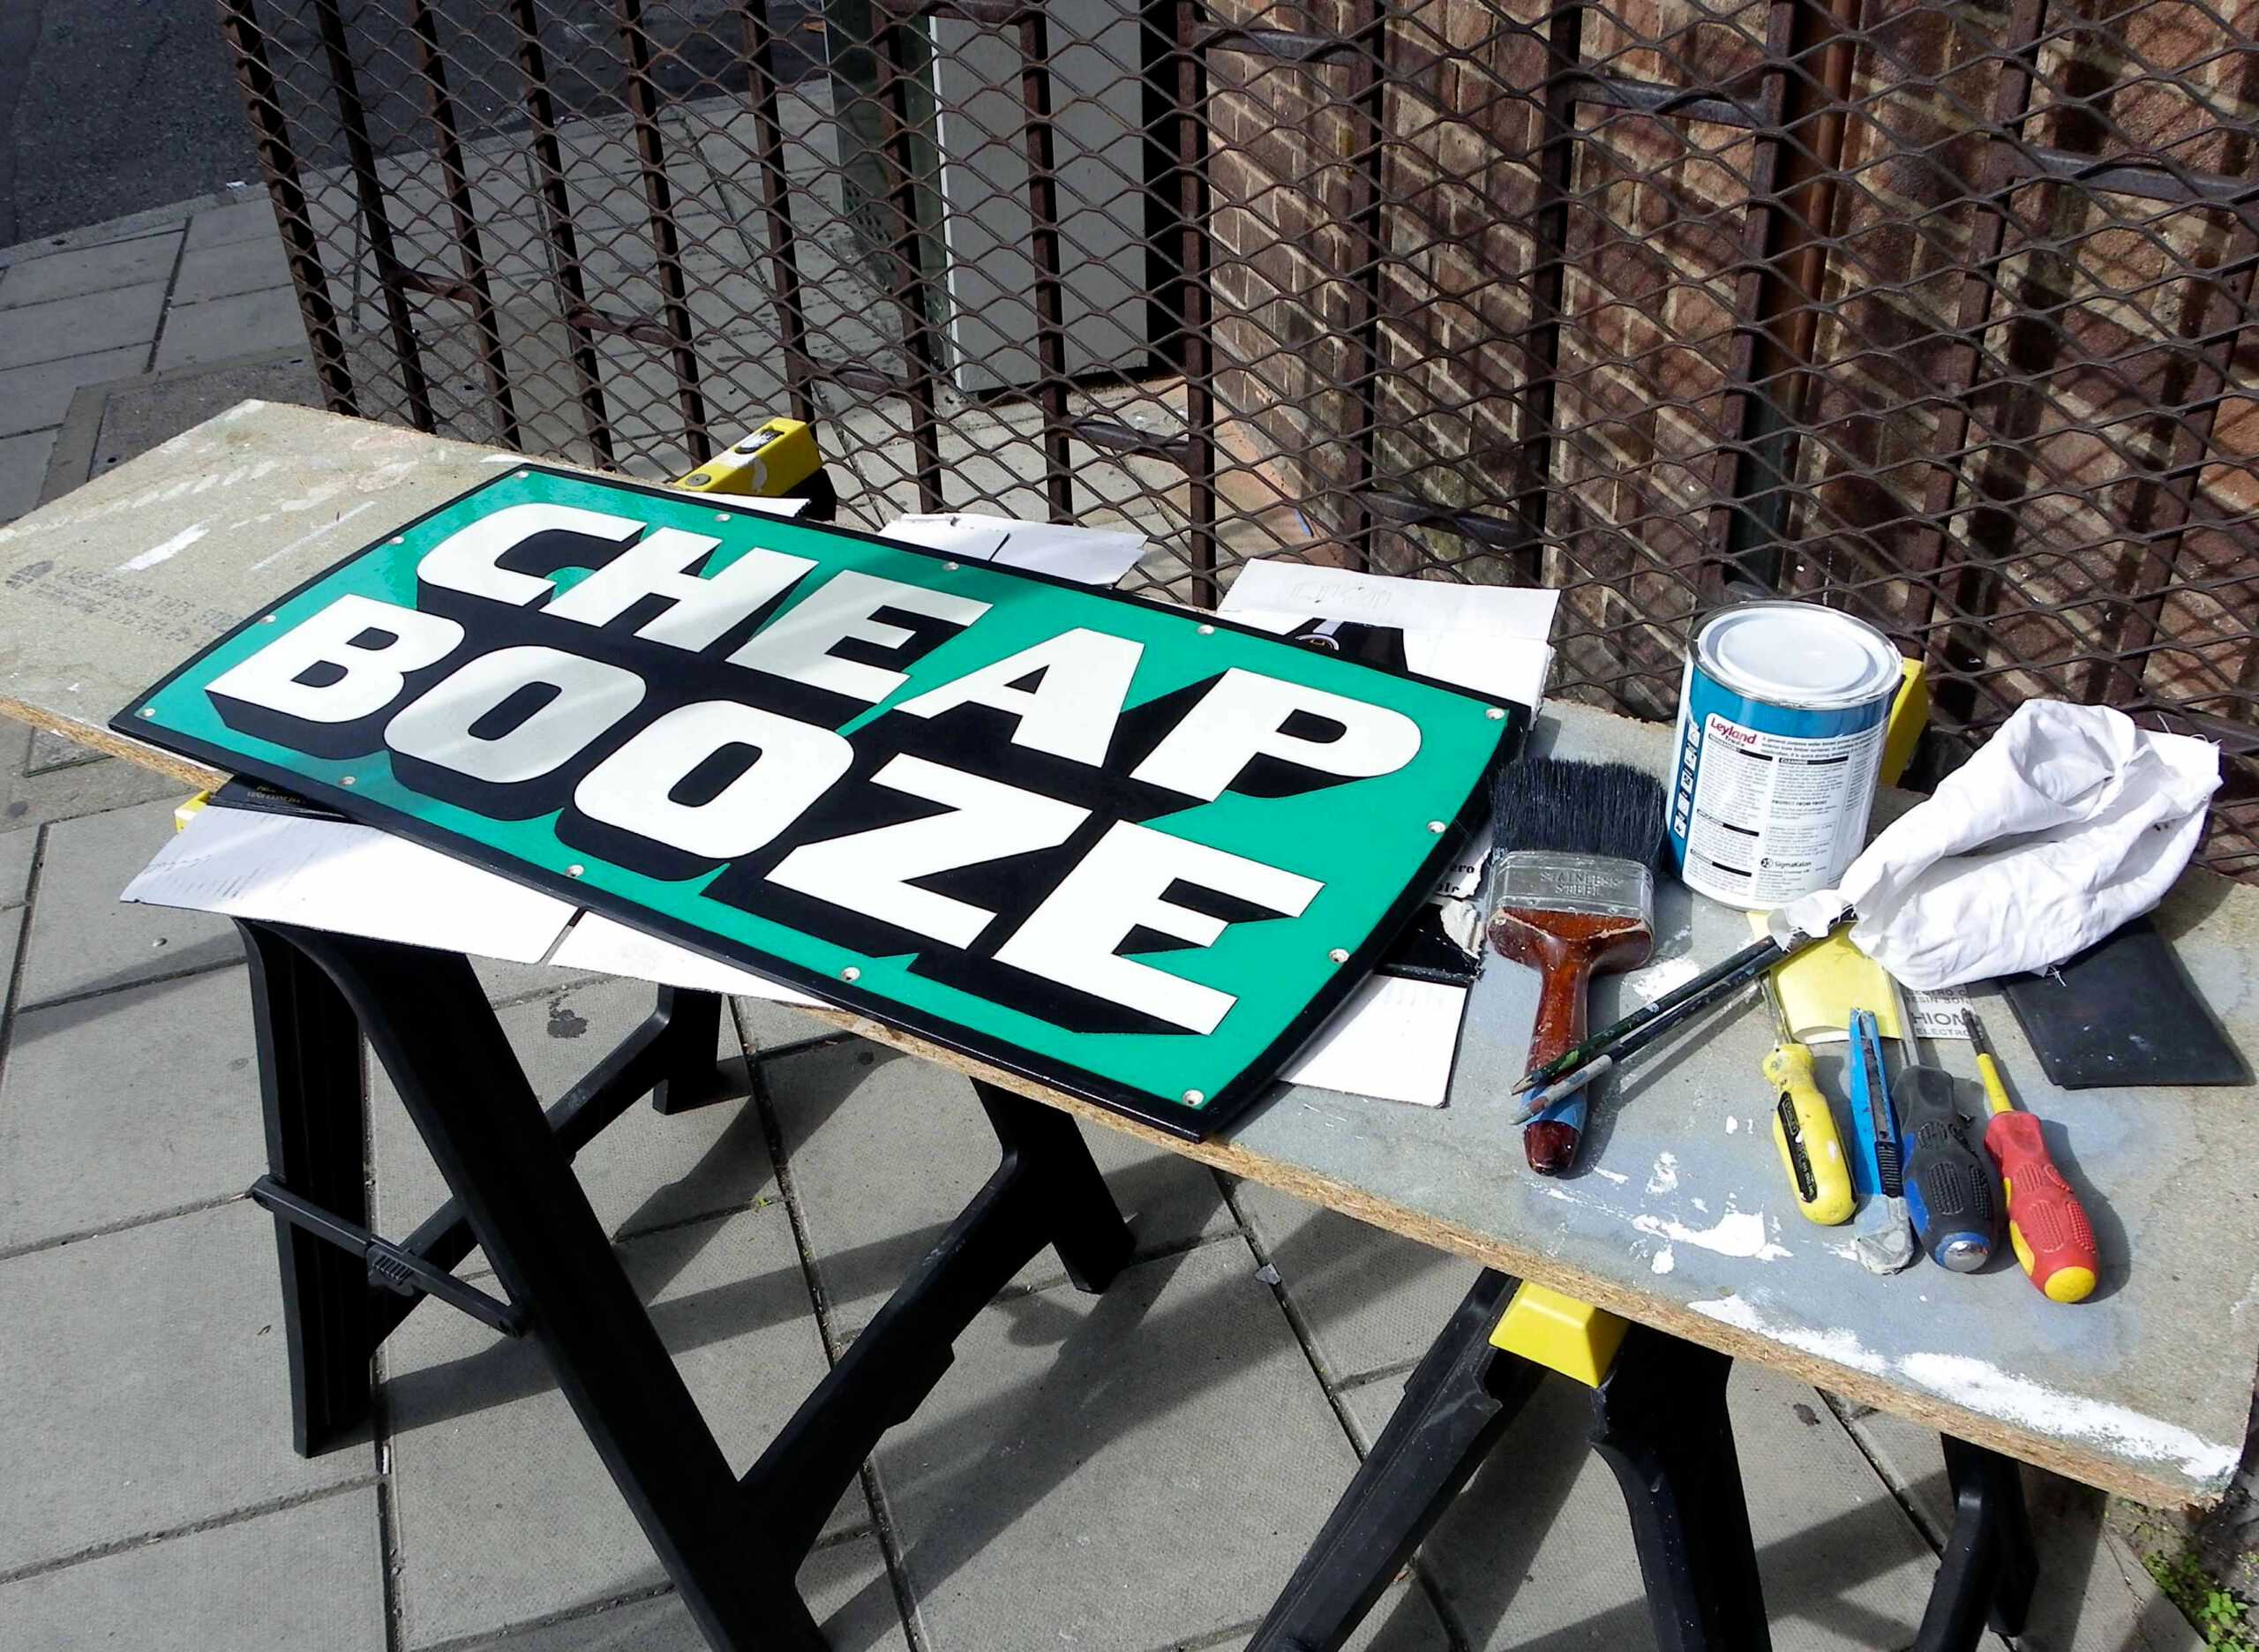 Replacement Cheap Booze sign – work in progress.